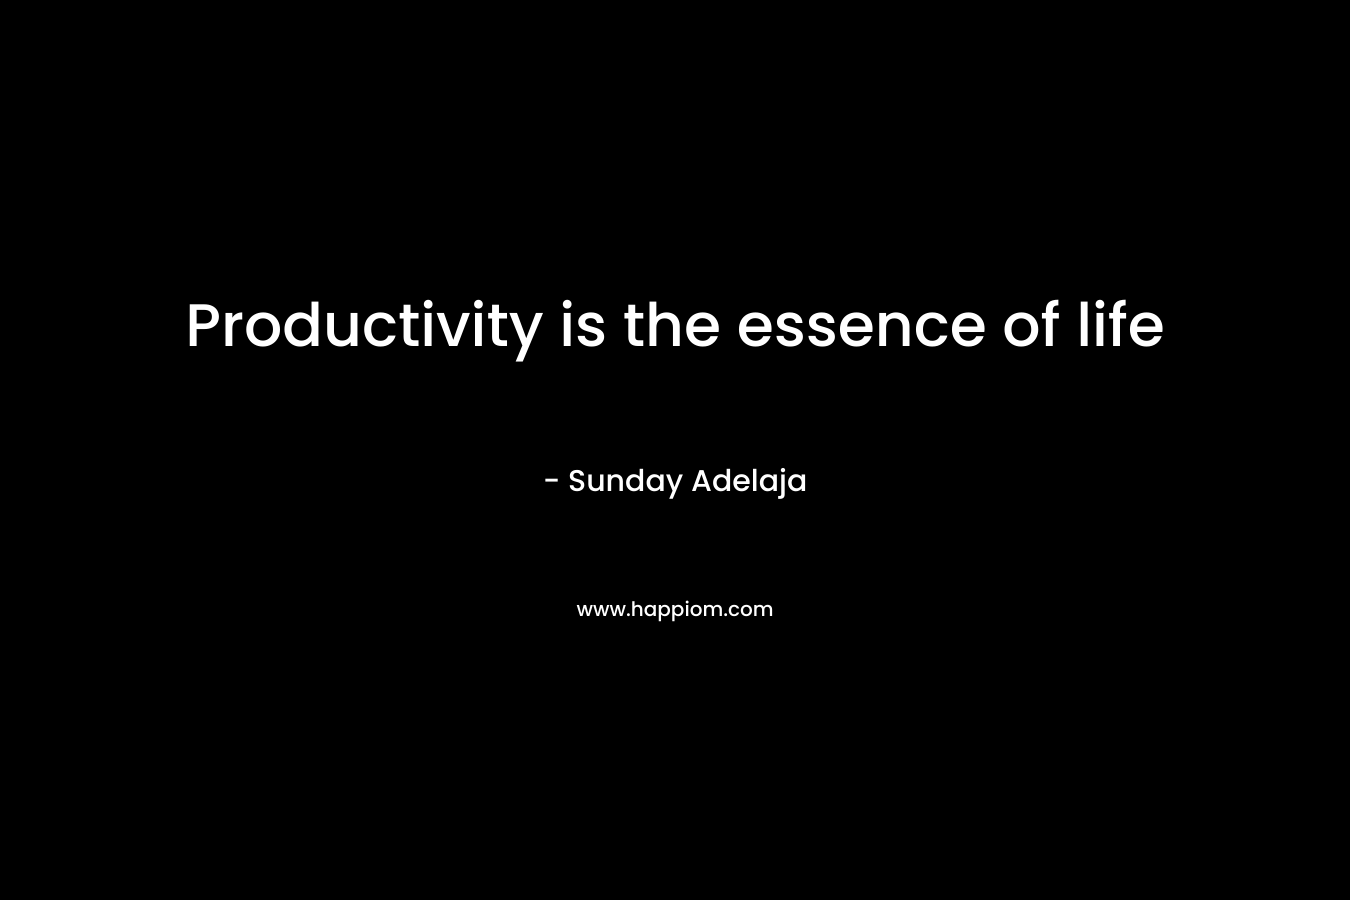 Productivity is the essence of life